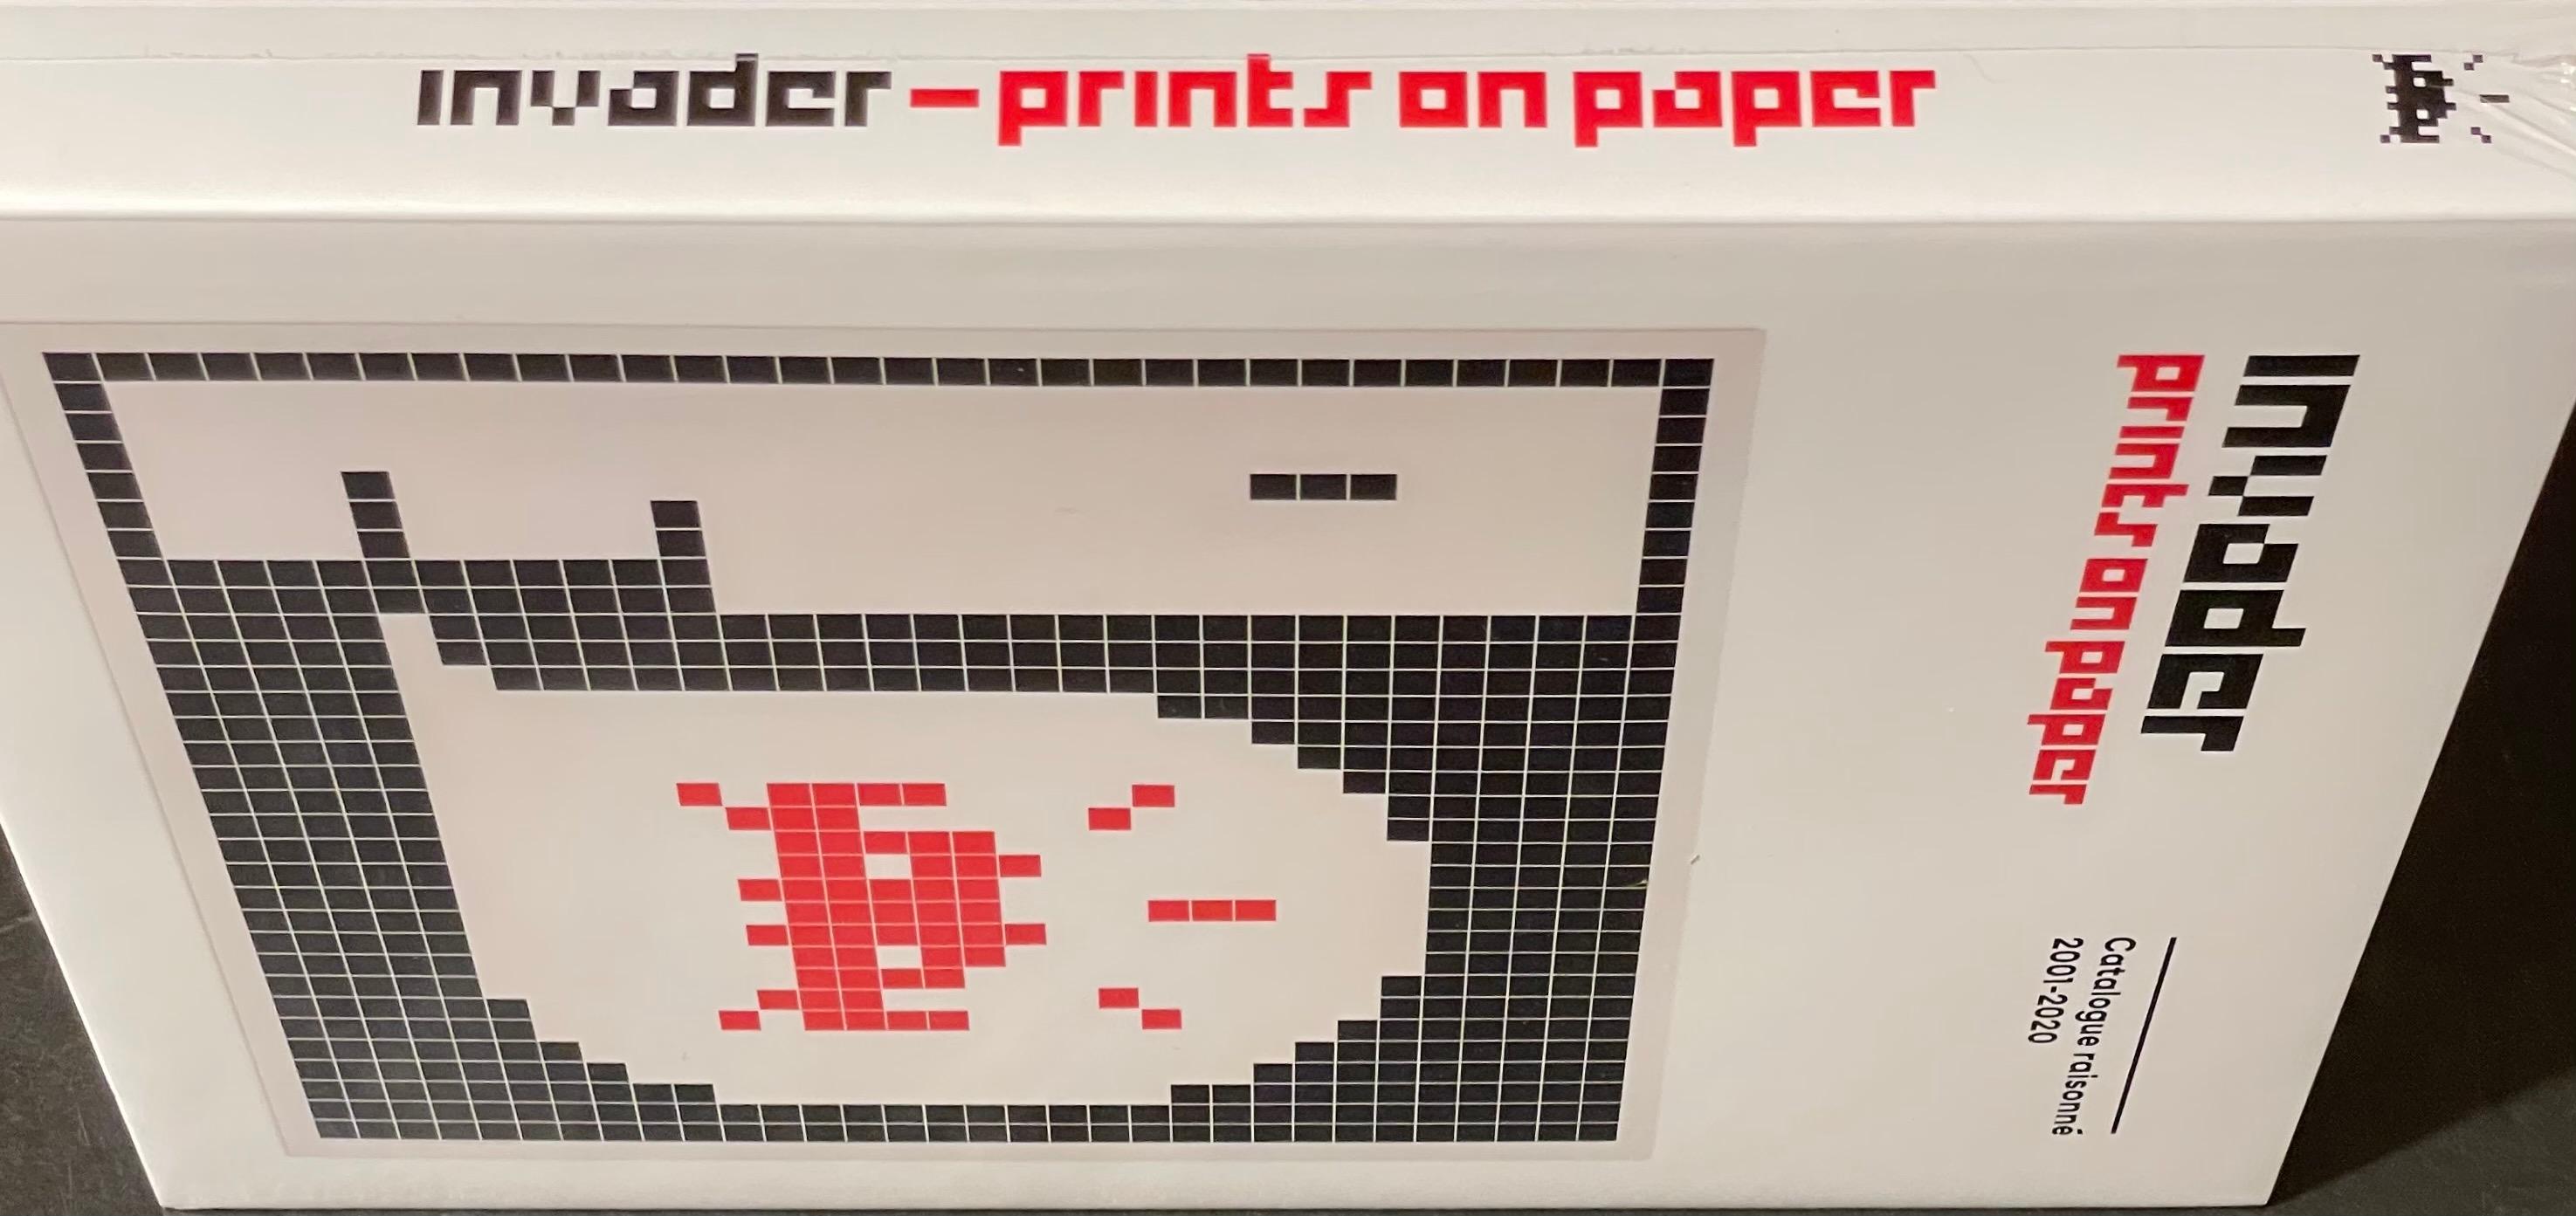 Space Invader Prints On Paper Art Book Prints 2001 - 2020 Limited Edition Street For Sale 1